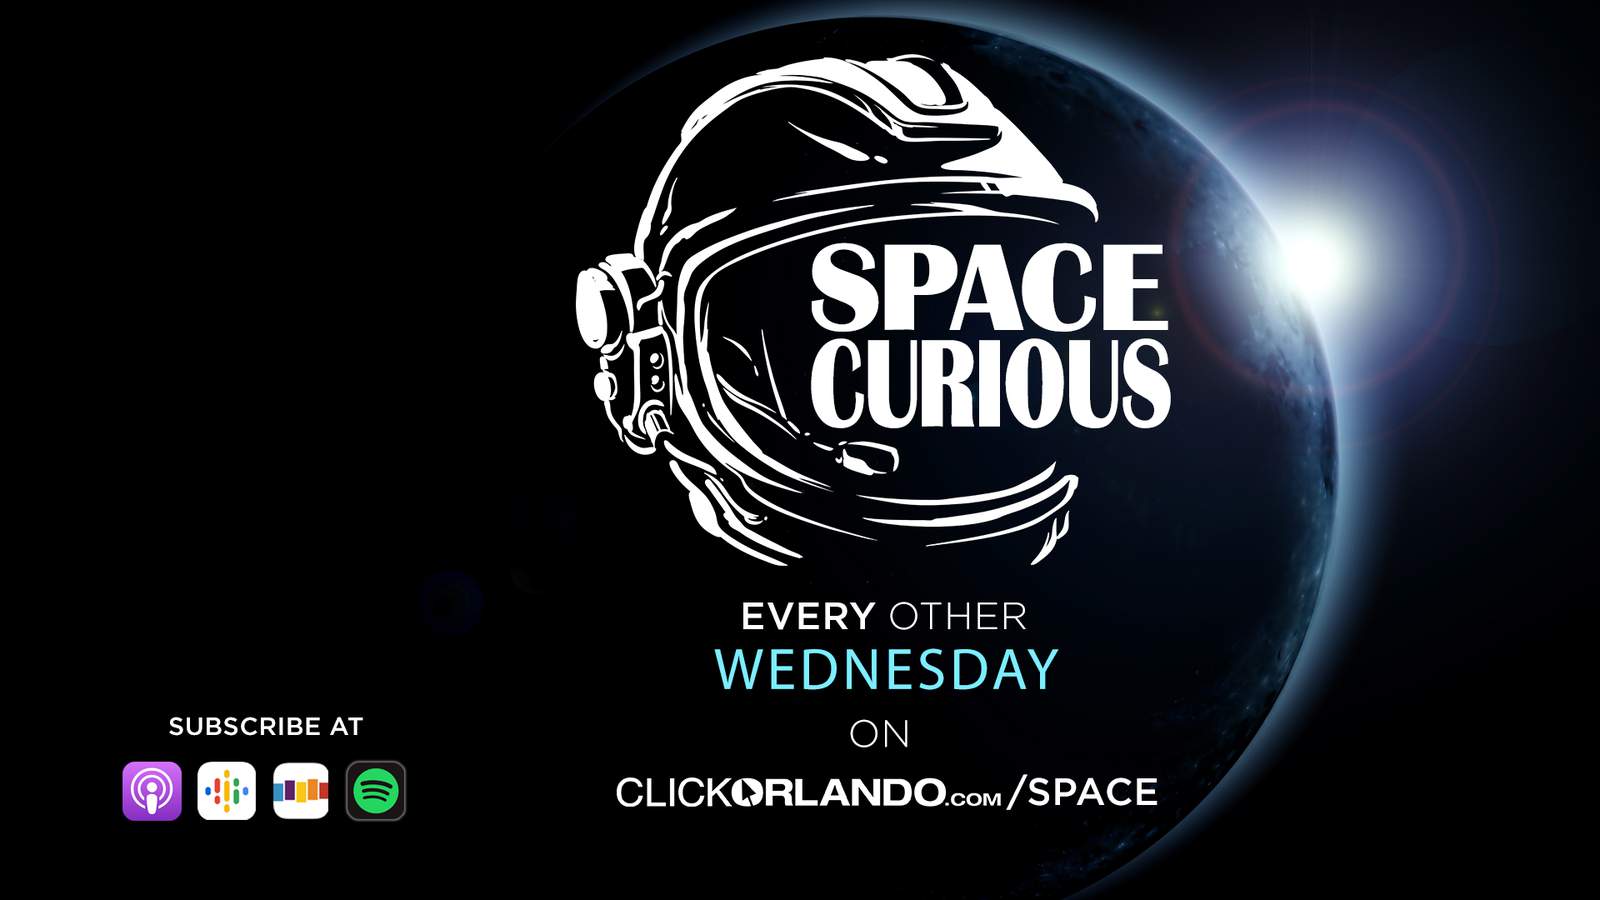 Introducing Space Curious, a new podcast by WKMG News 6